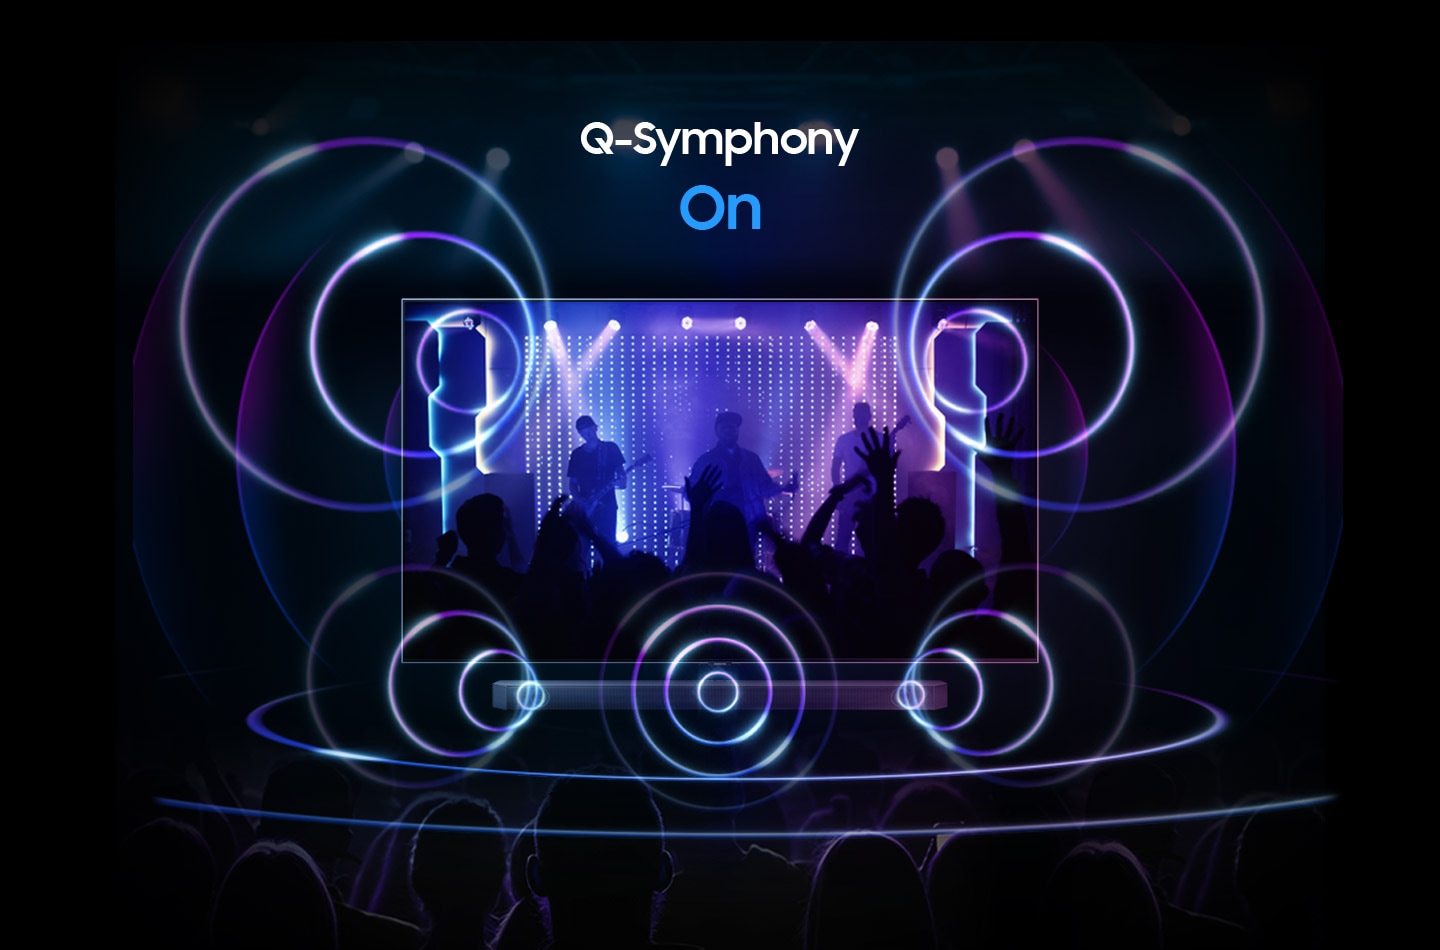 Only sound from the Soundbar Is activated when Q-Symphony is off. Sound from both the TV and Soundbar is activated together when Q-Symphony is on.